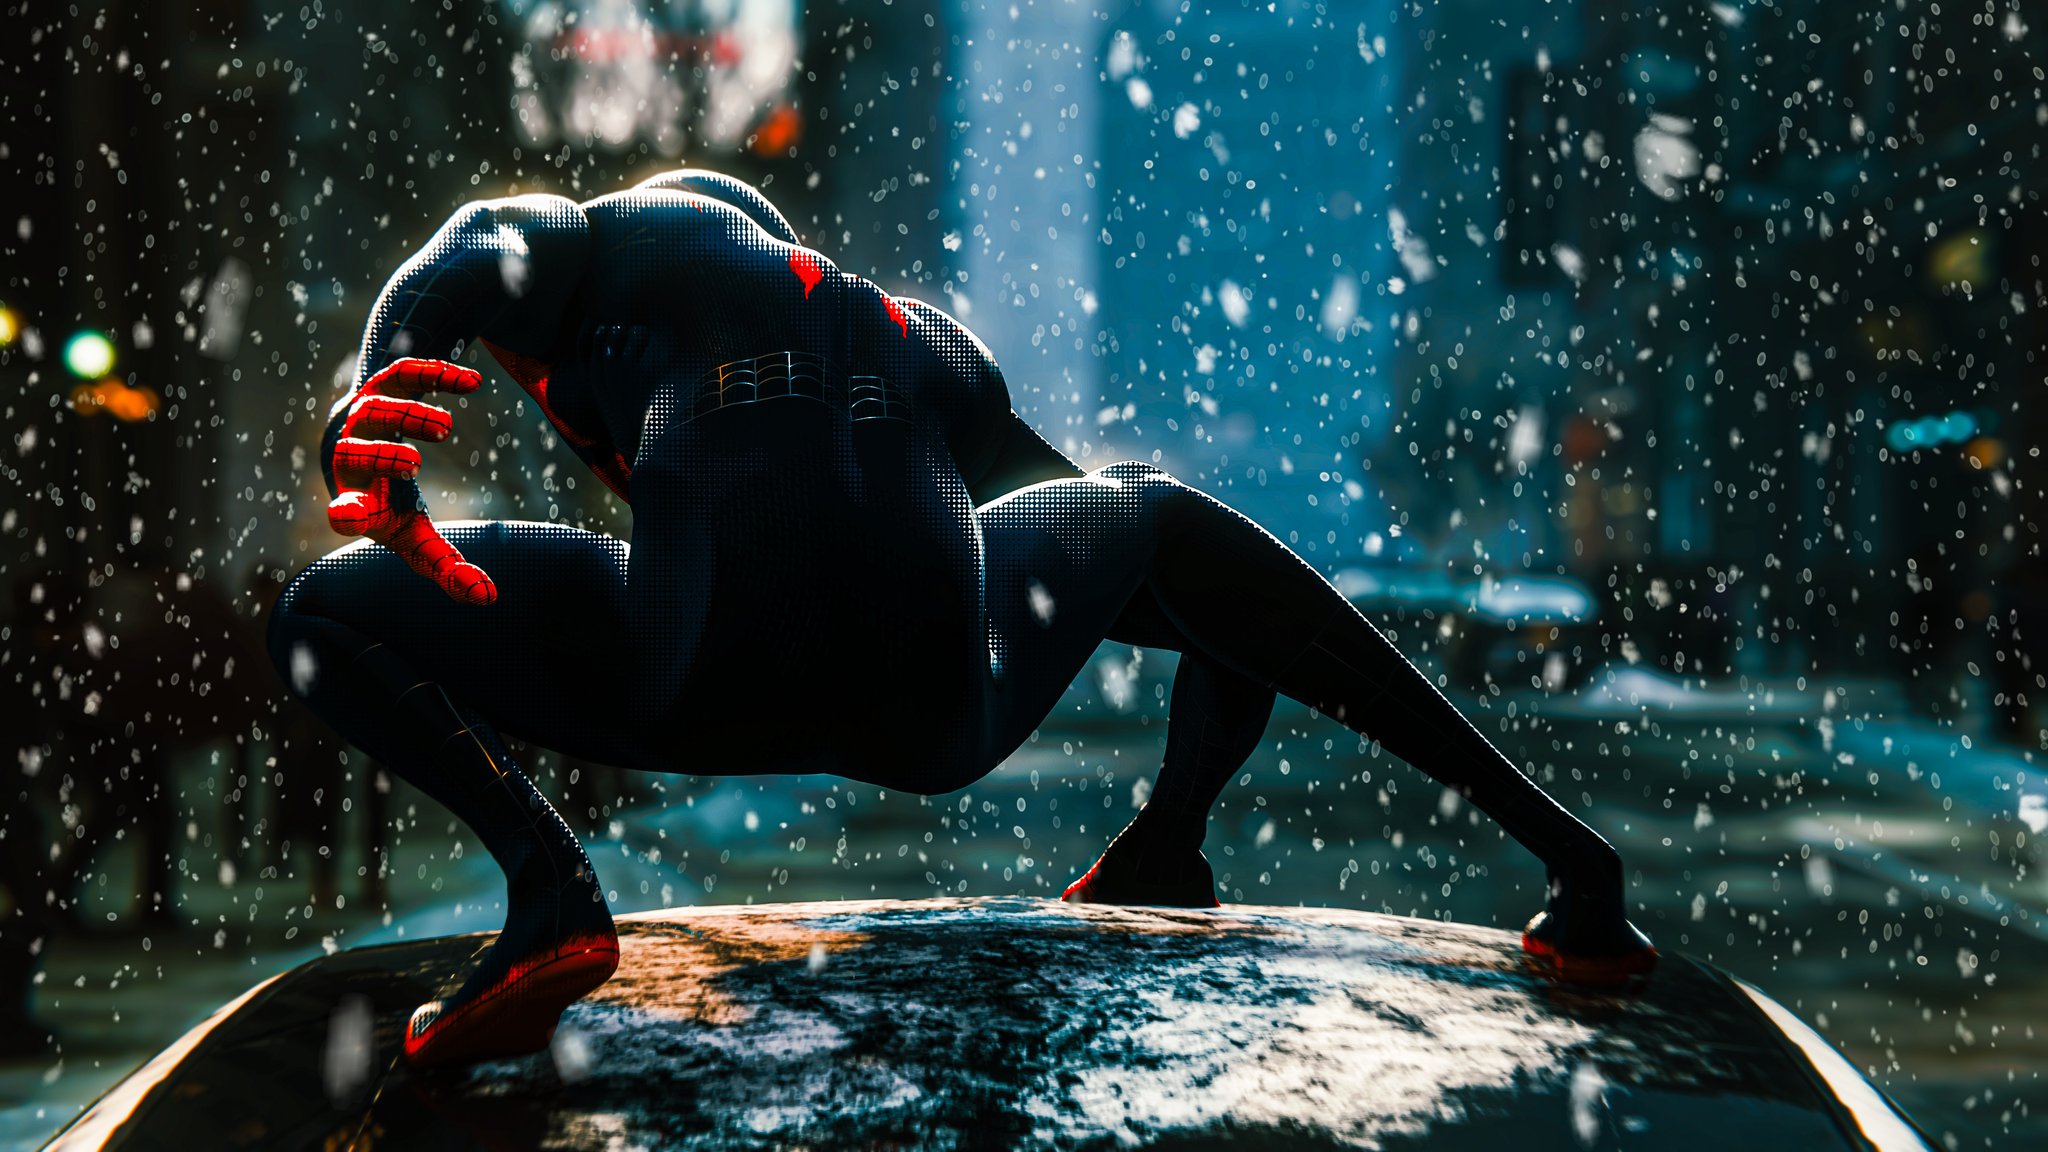 Spider-Man Saves People, Neither Snow Nor Rain